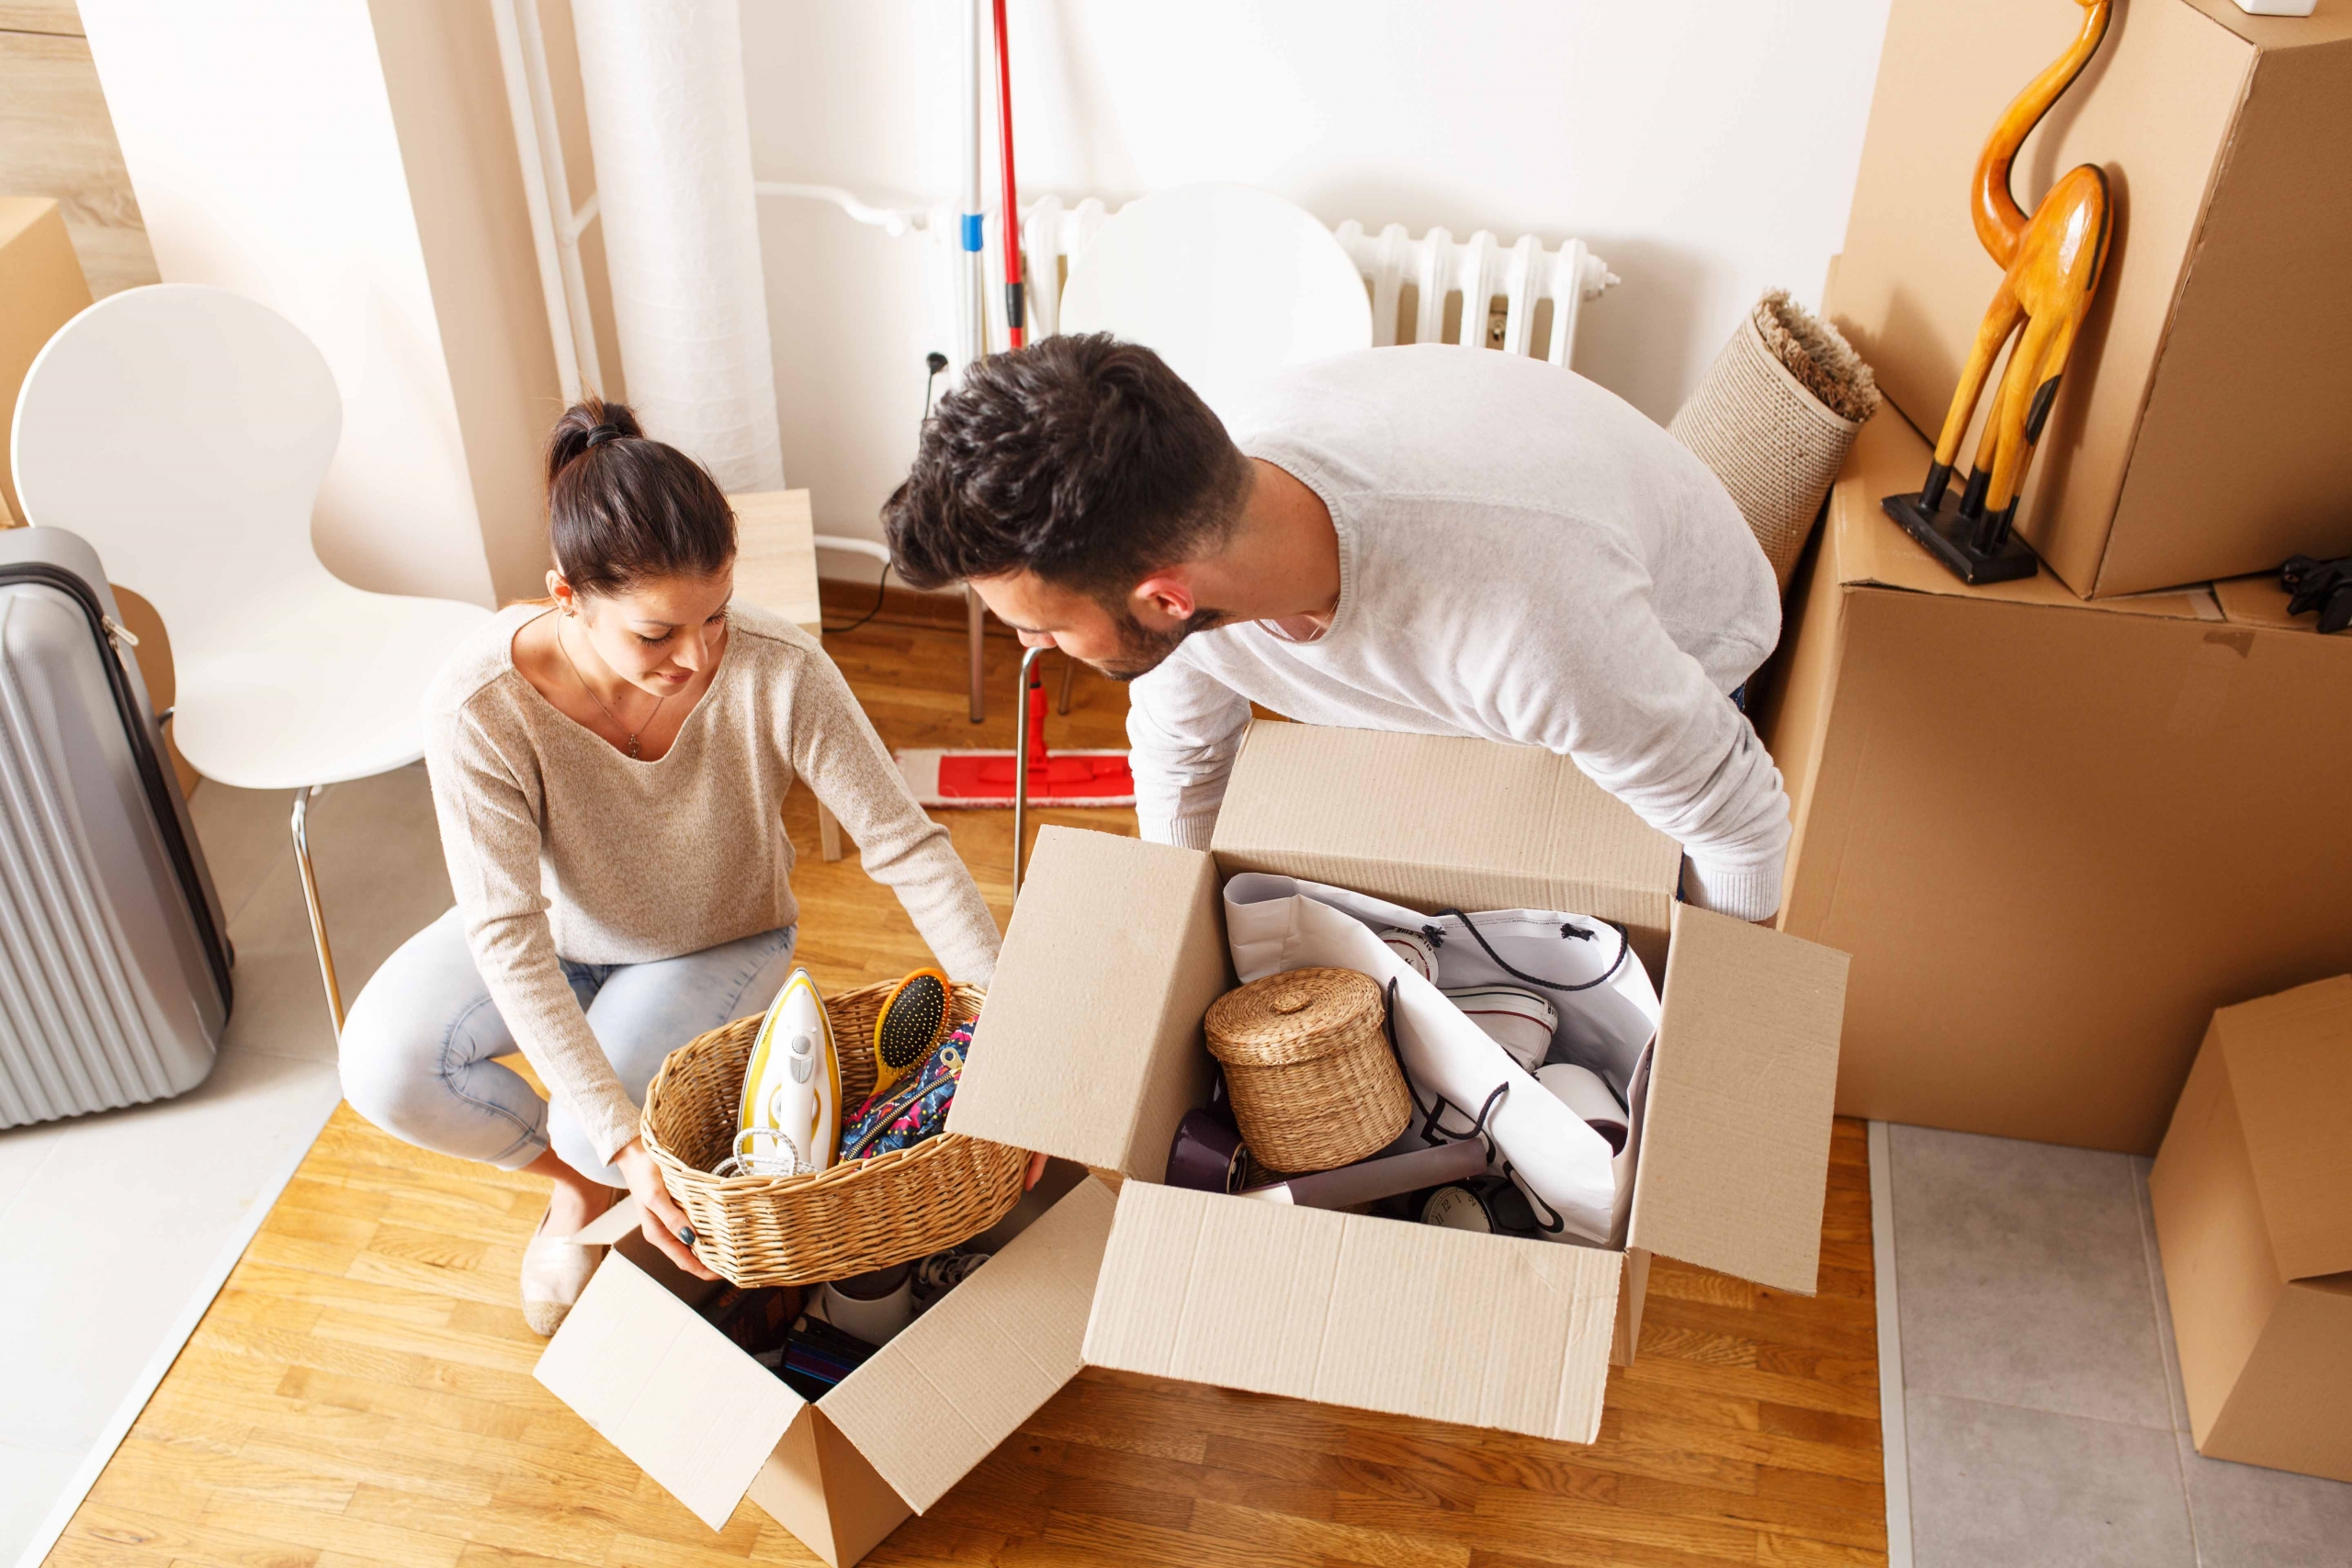 Packing Like a Pro: 5 Tips To Keep Your Belongings Safe During Moving